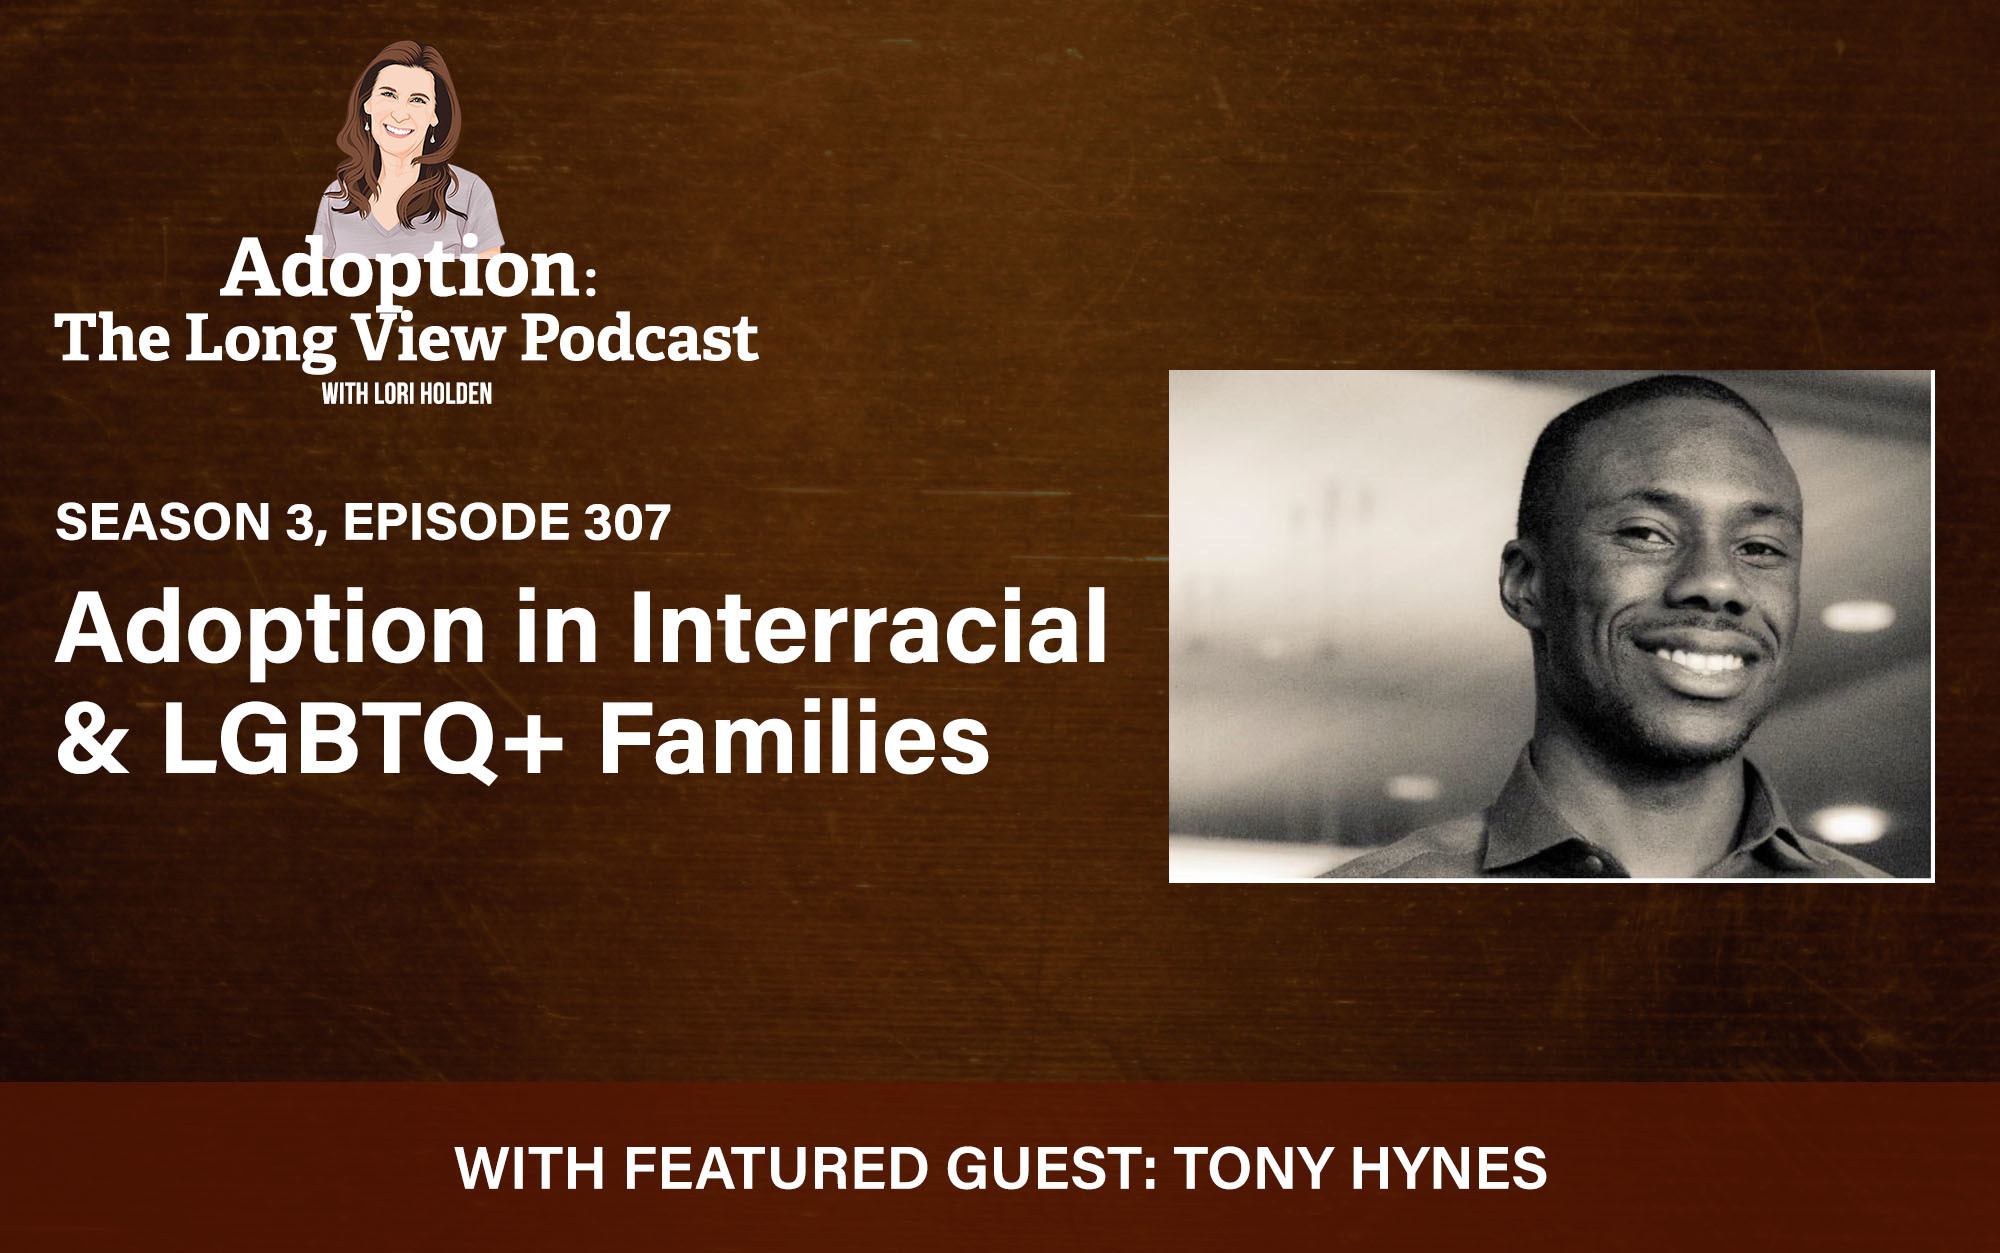 Adoption in interracial and lgbtq families